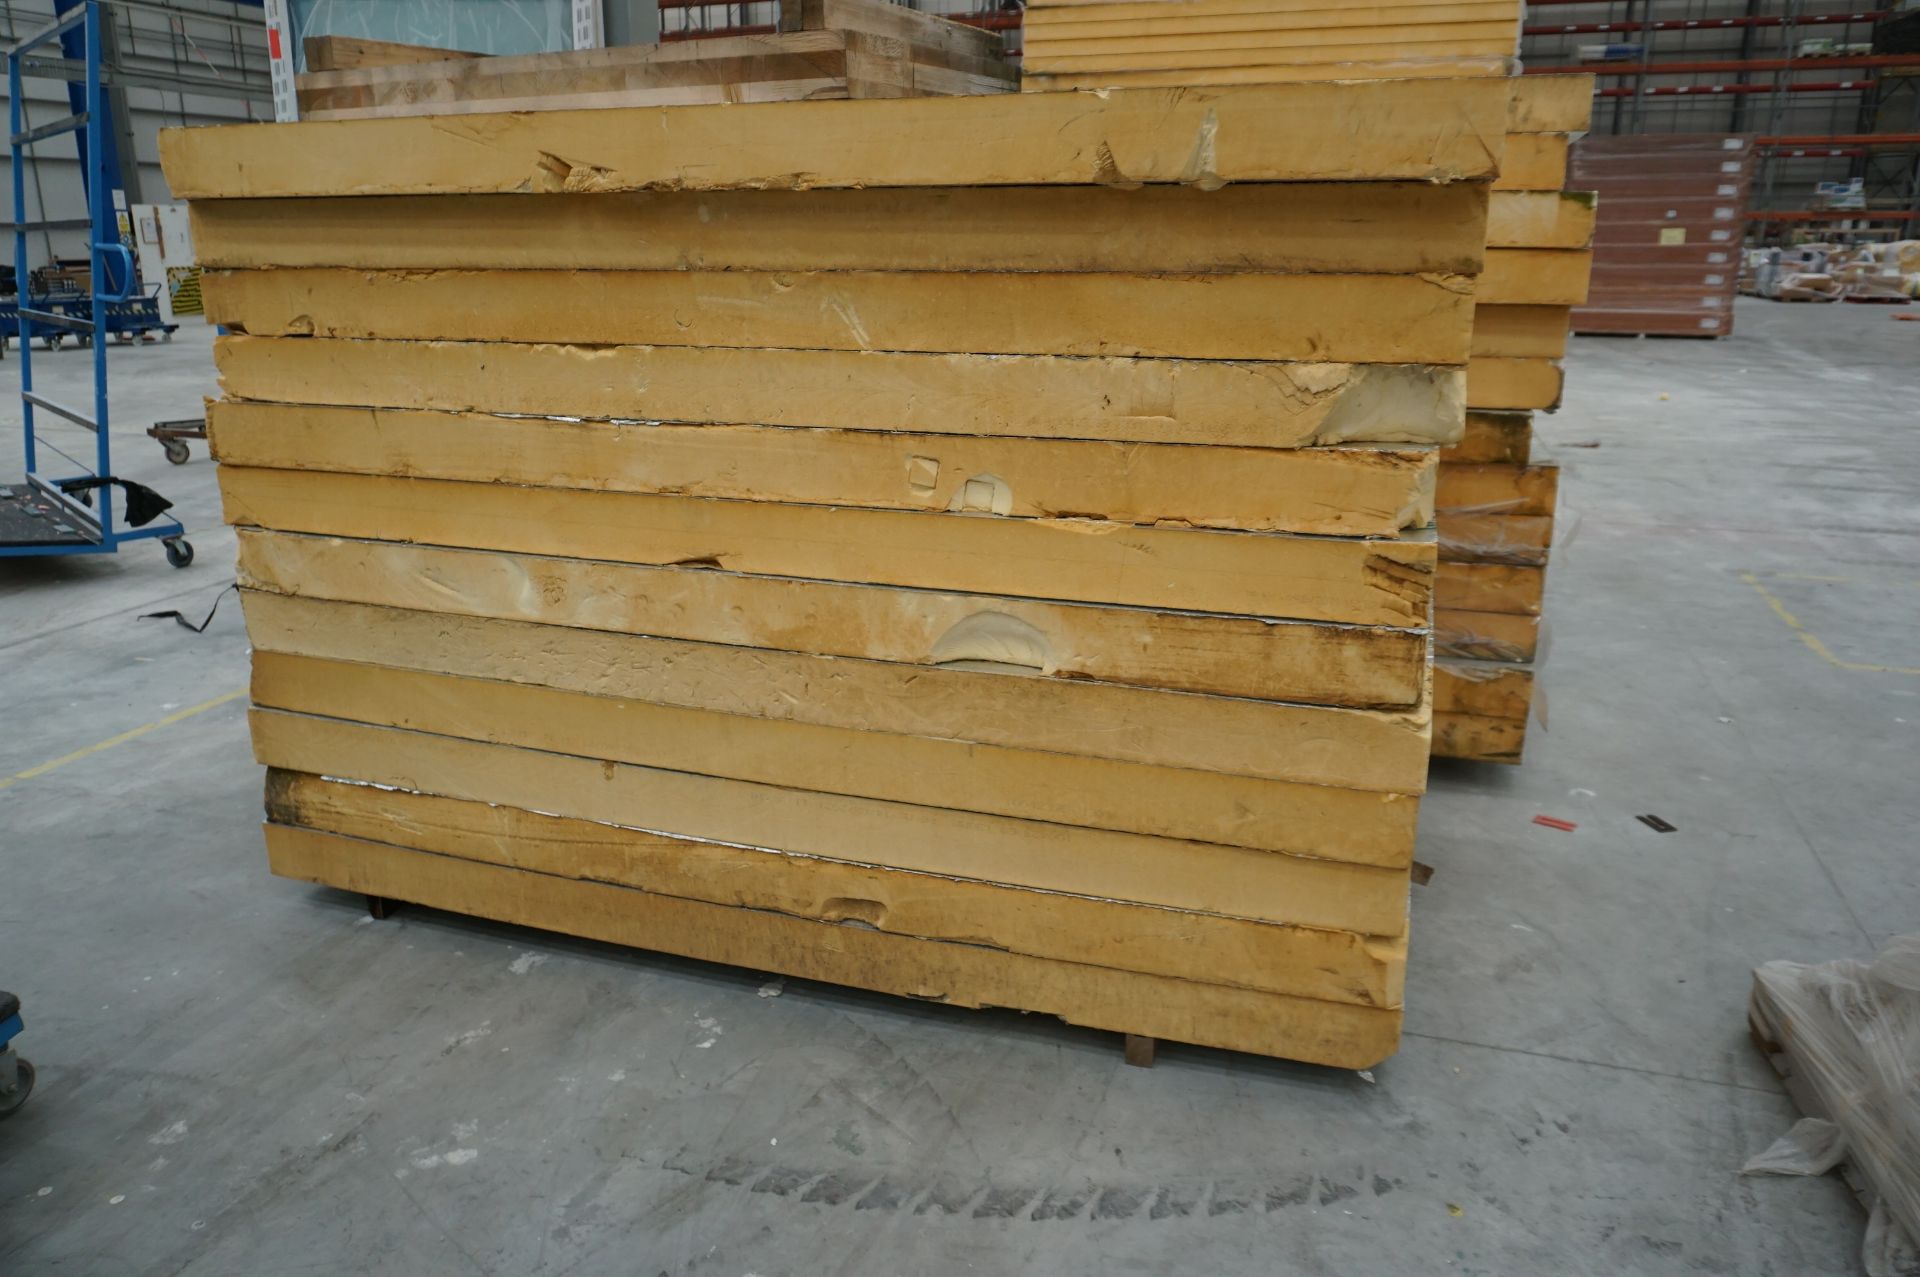 39x (no.) Kingspan, Therma TP10 insulation board, 3 mixed pallets, thickness 80 to 130mm, 1200 x - Image 3 of 5